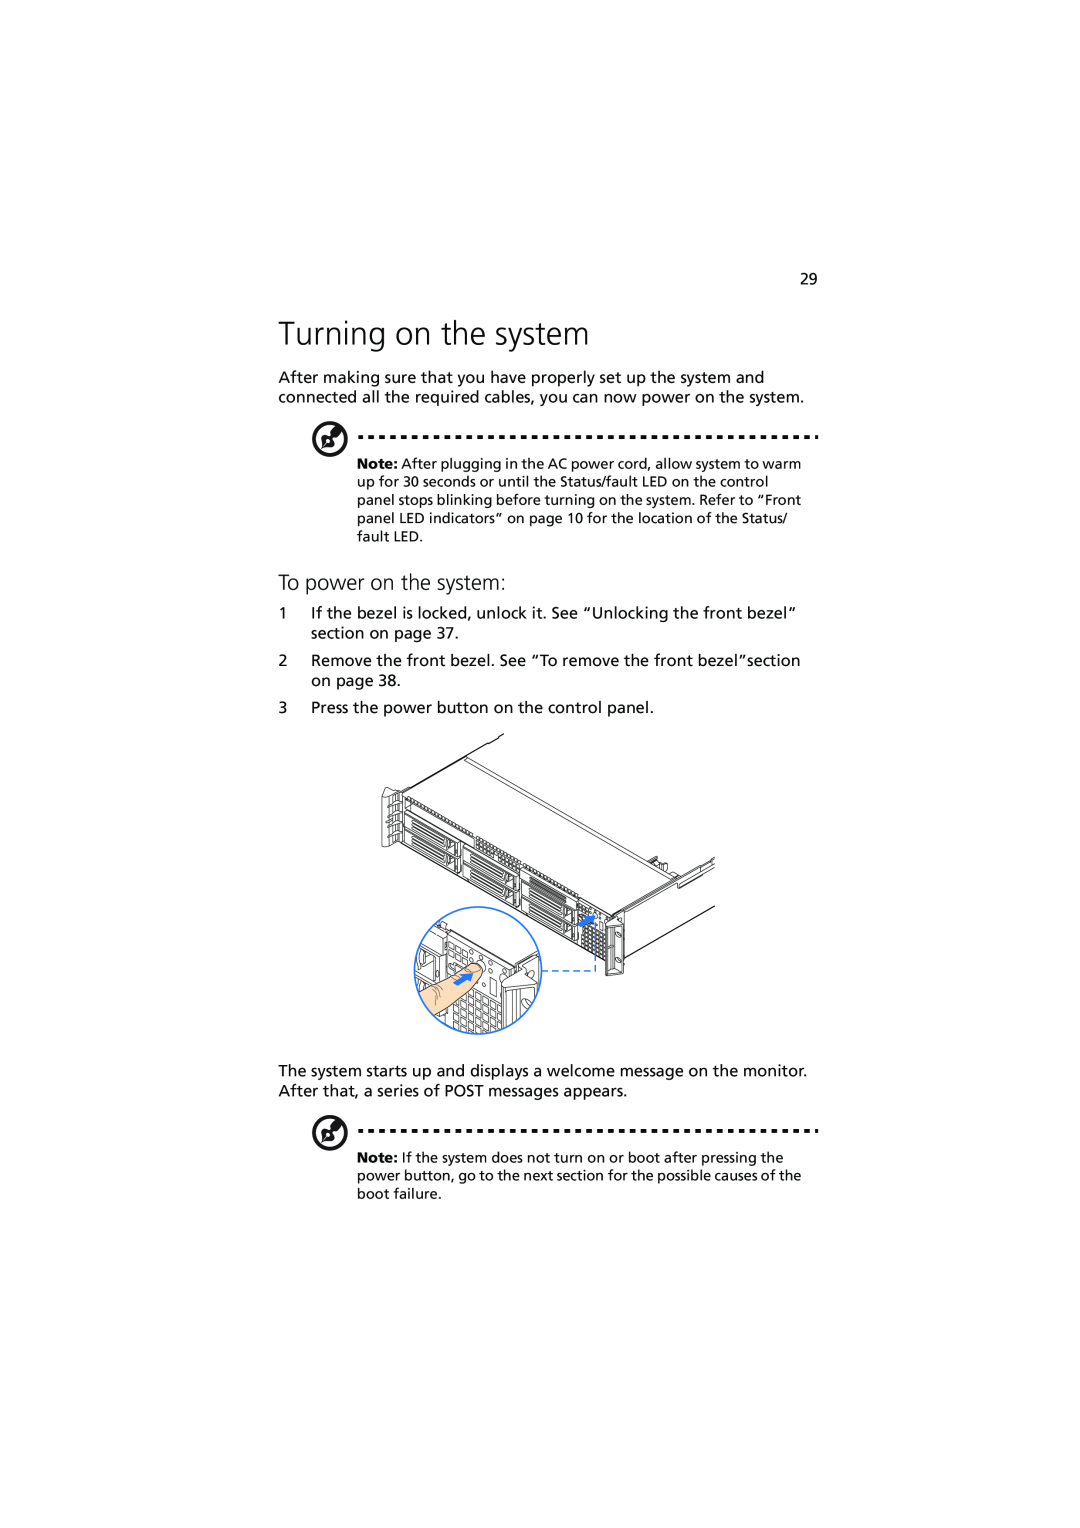 Acer R720 Series manual Turning on the system, To power on the system 